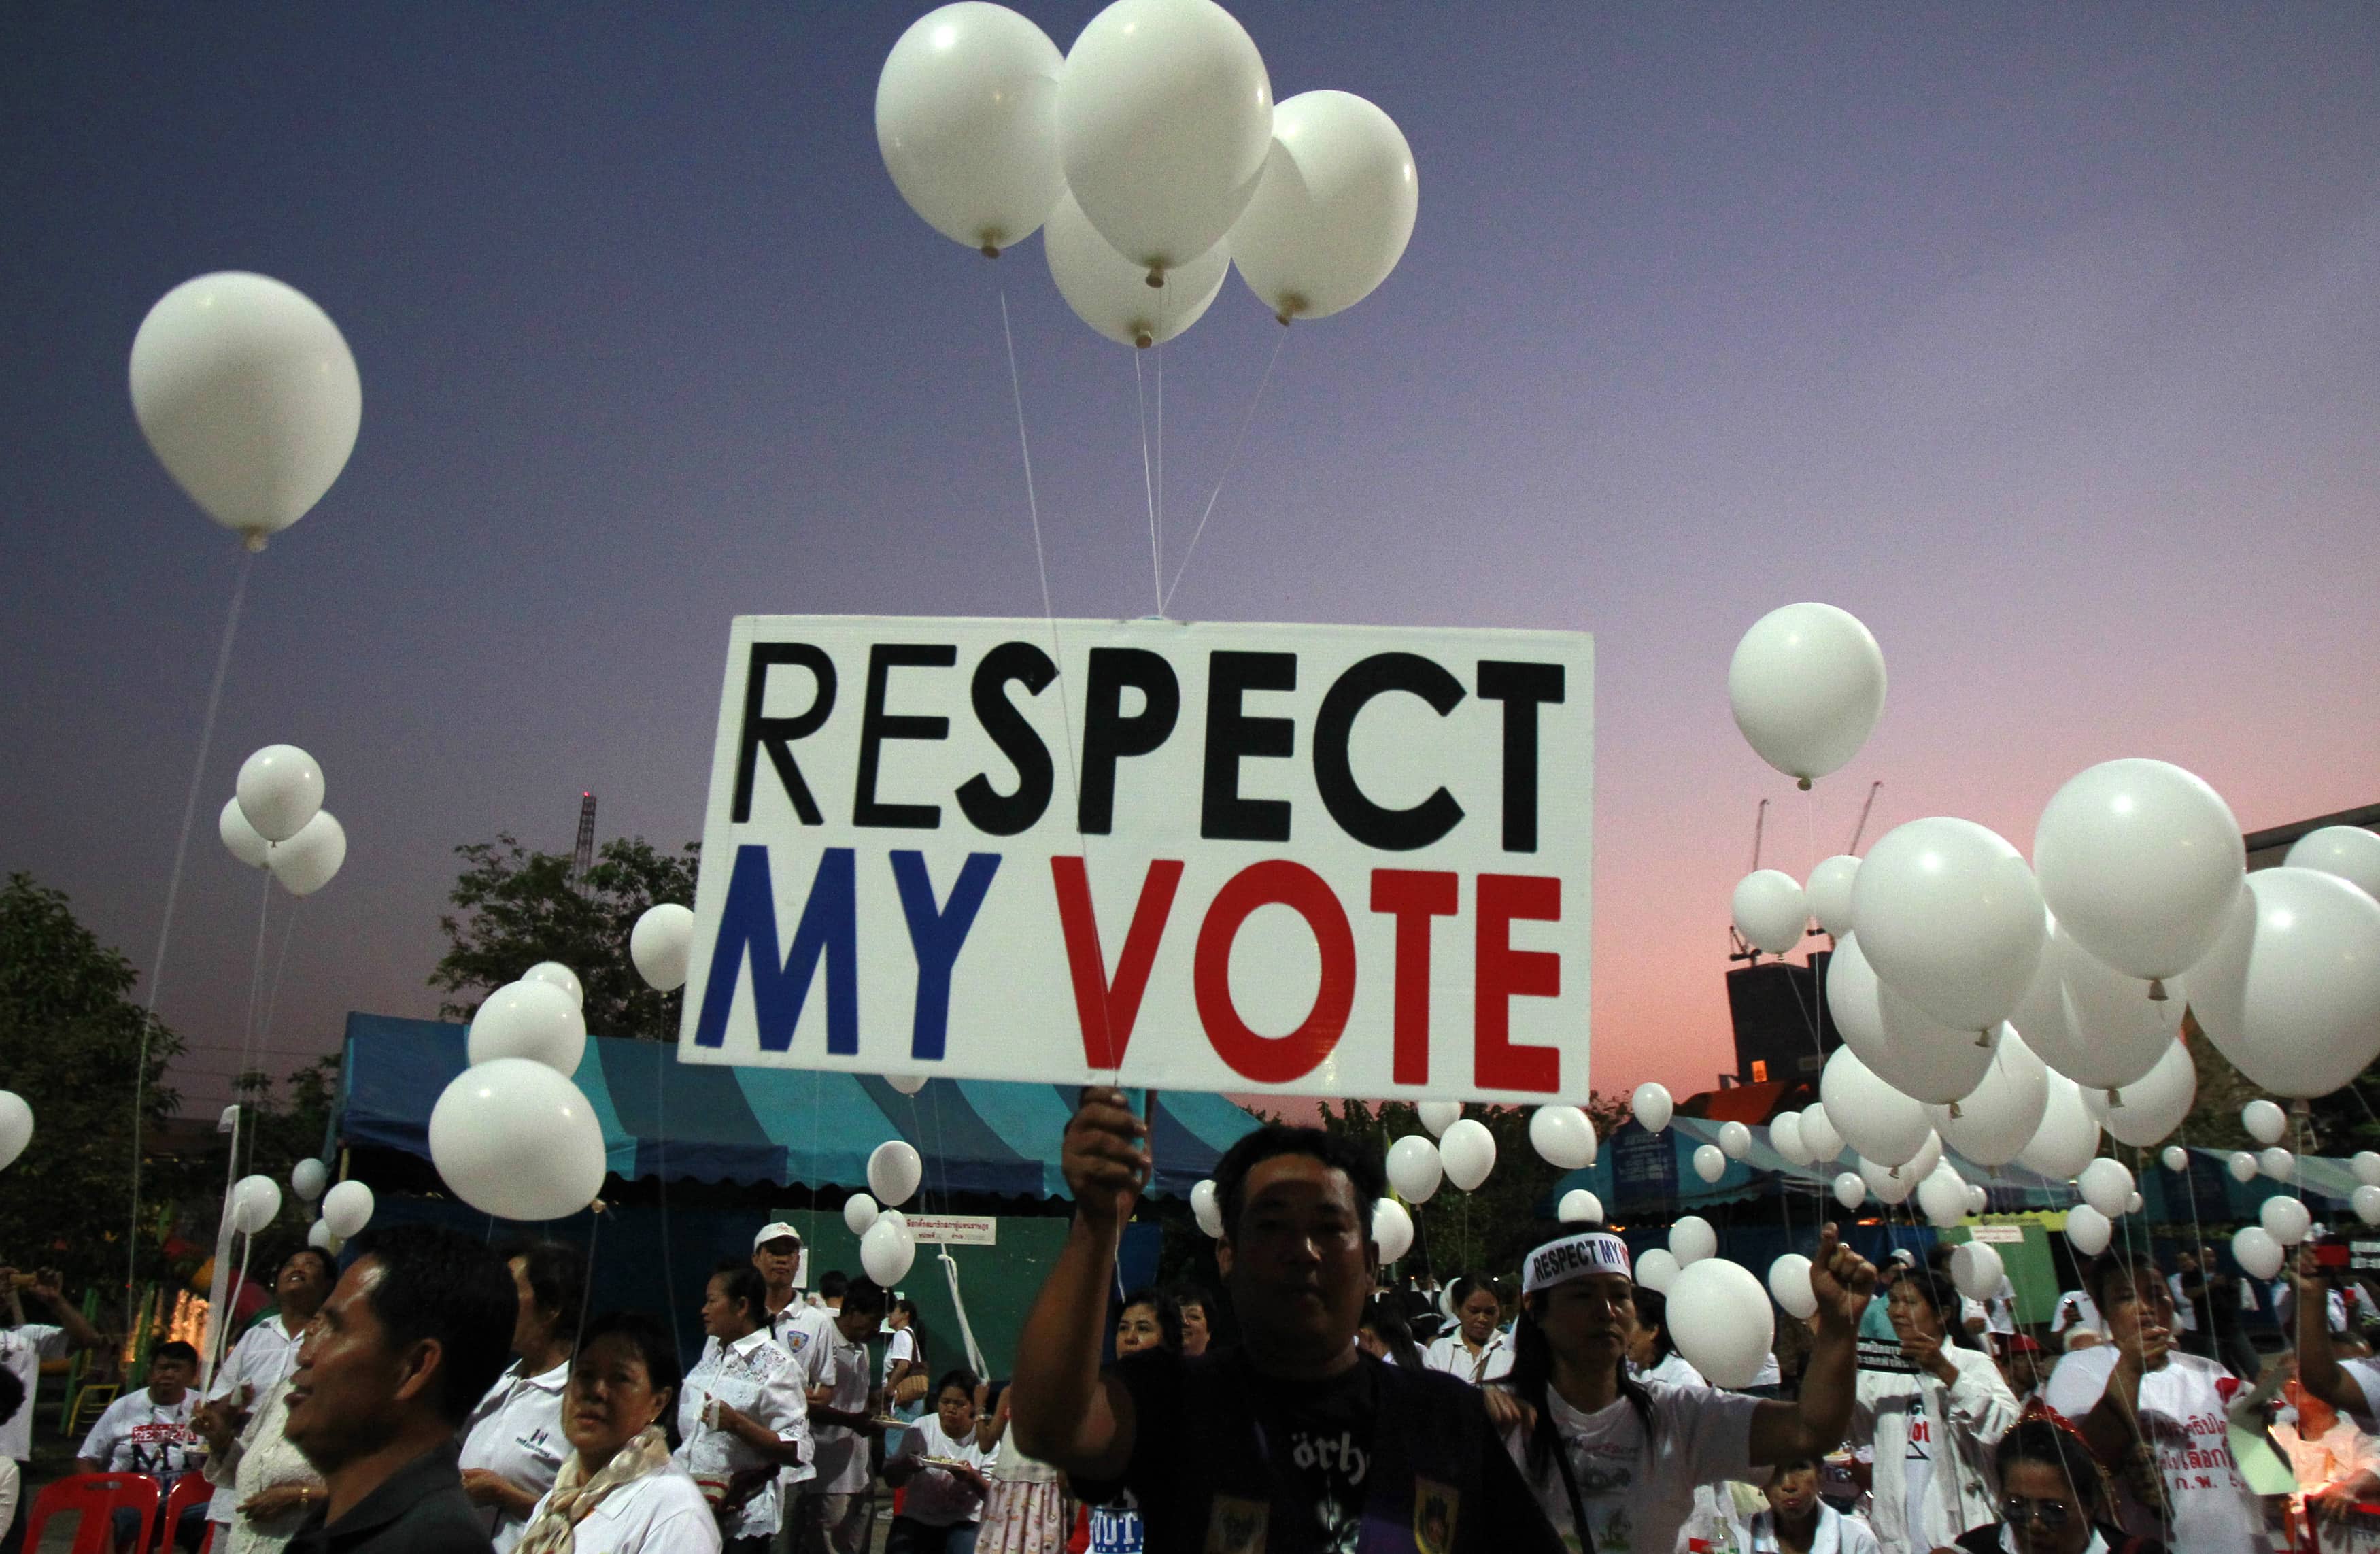 Pro-government supporters hold a placard and white balloons during an election campaign in Nonthaburi province, on the outskirts of Bangkok, 31 January 2014, REUTERS/Chaiwat Subprasom